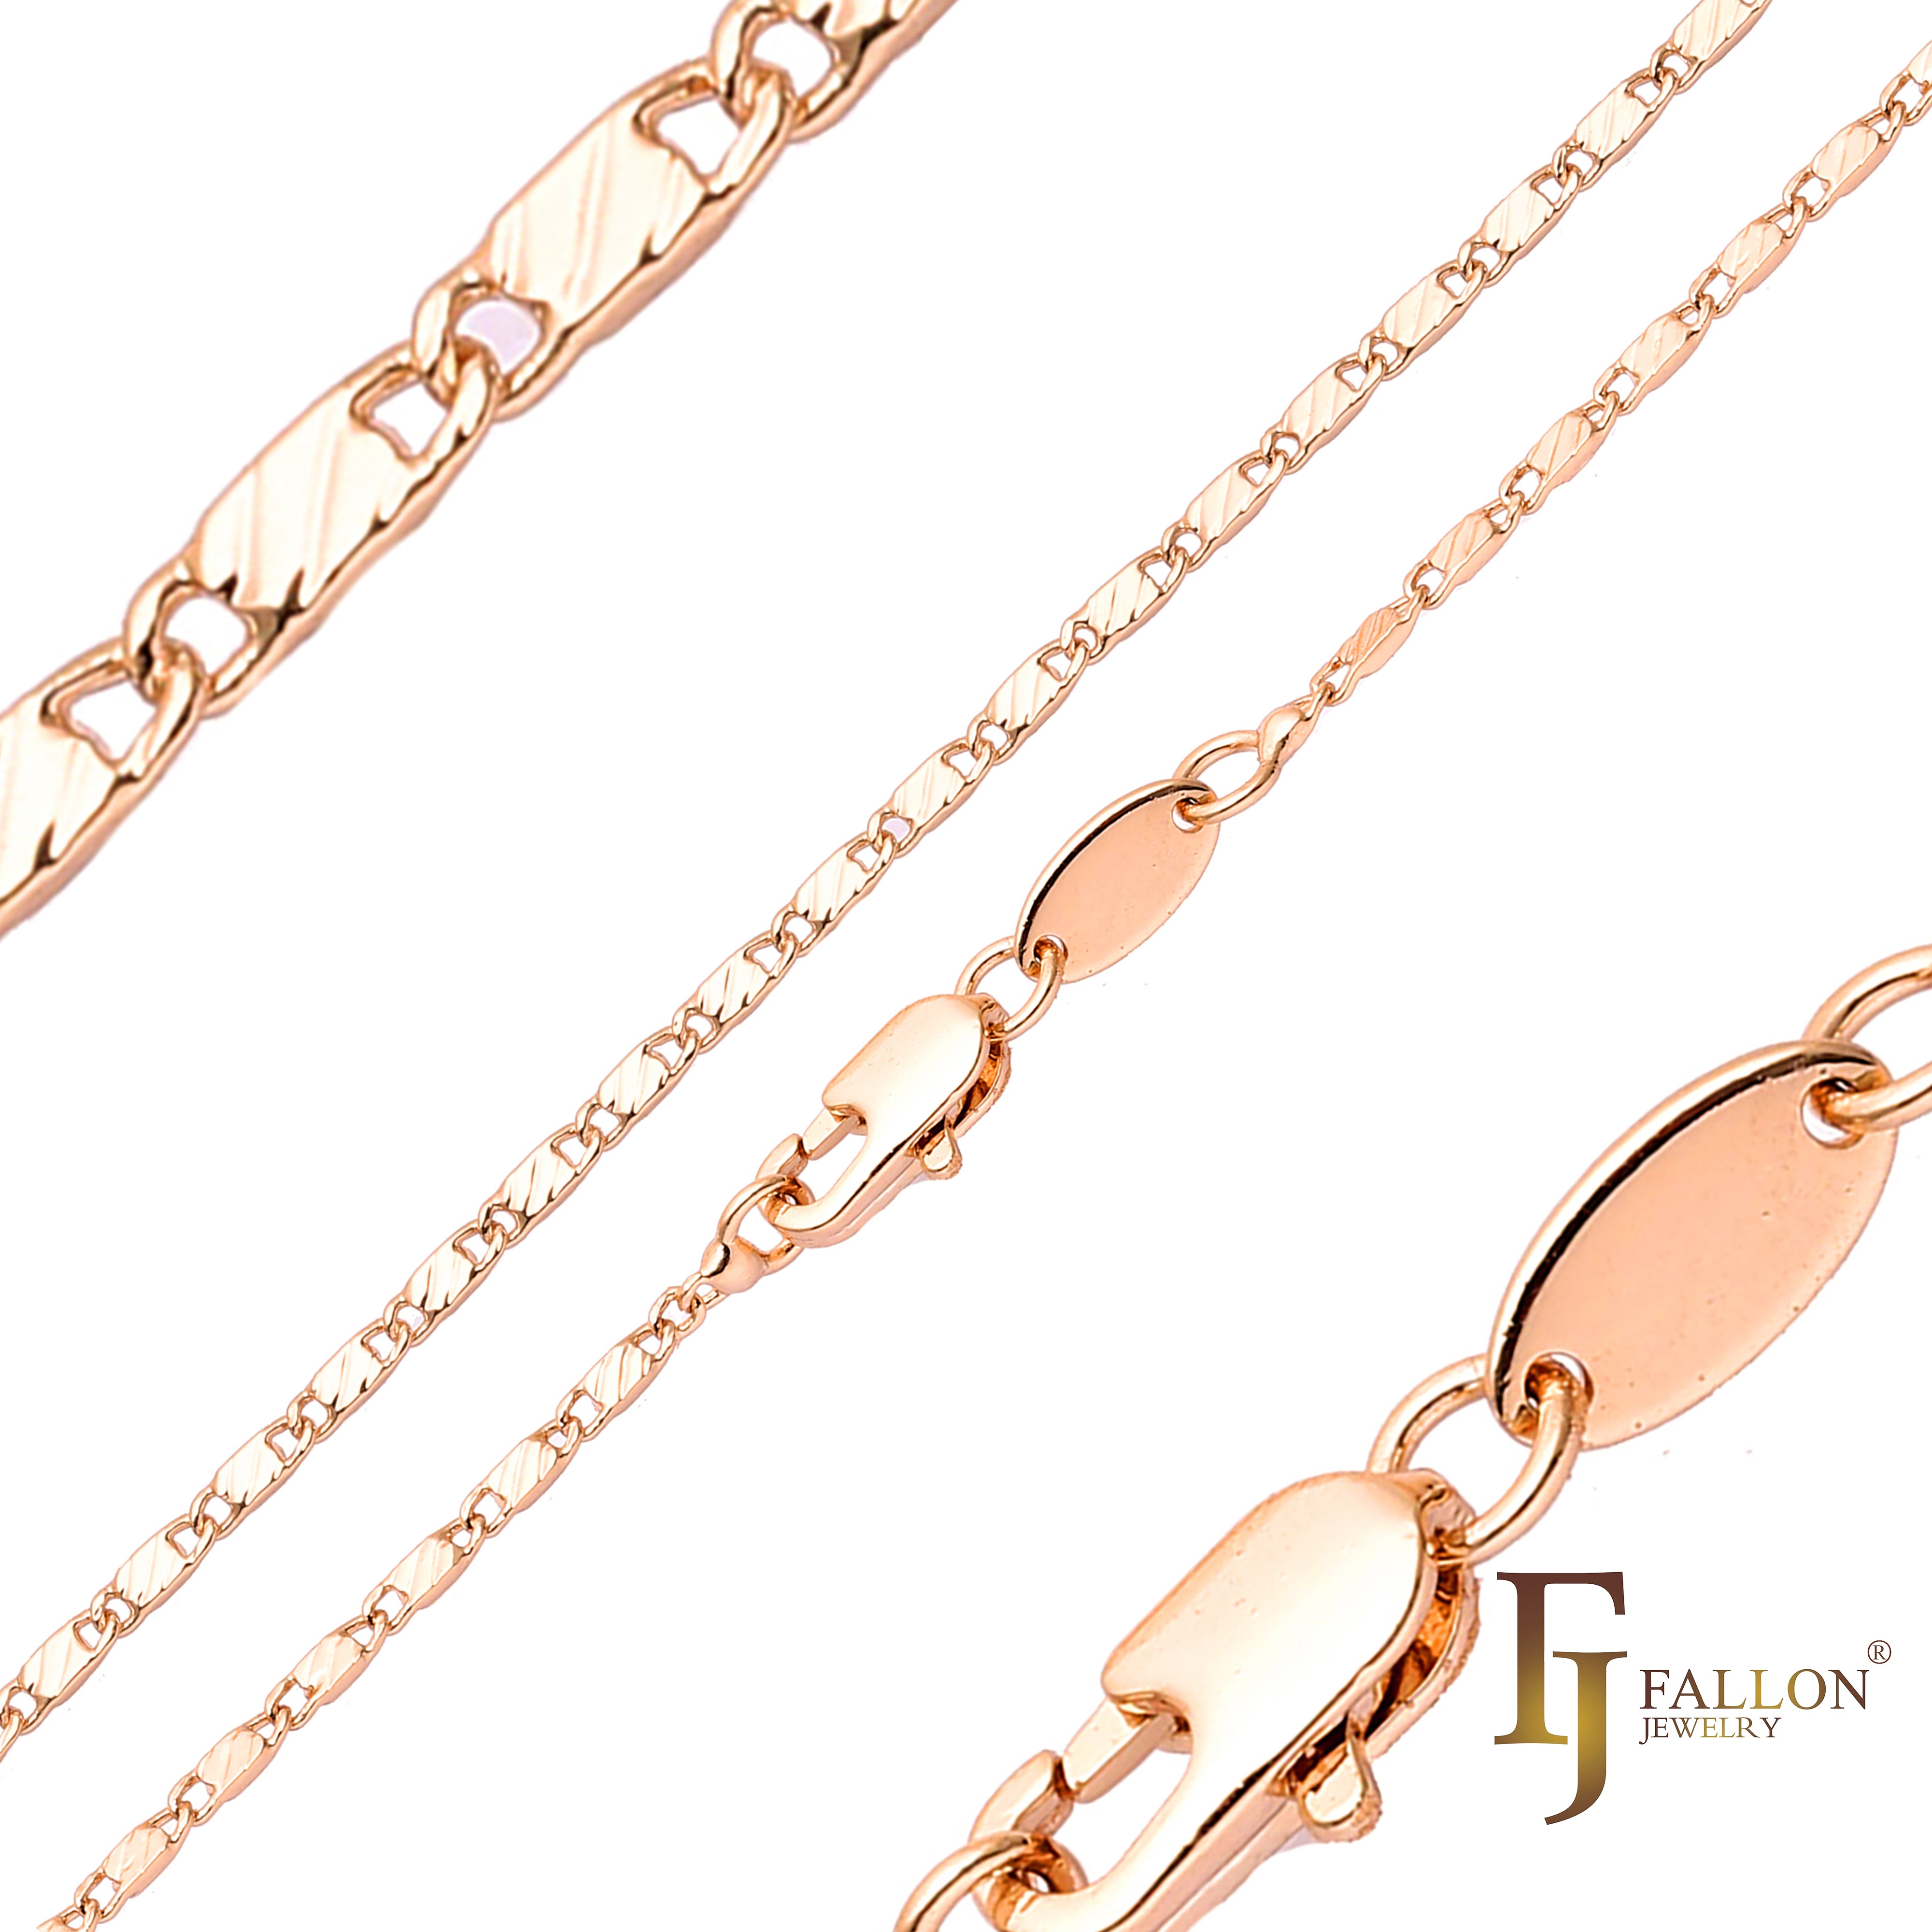 Solid snail link hammered chains plated in 14K Gold, Rose Gold, two tone, white gold